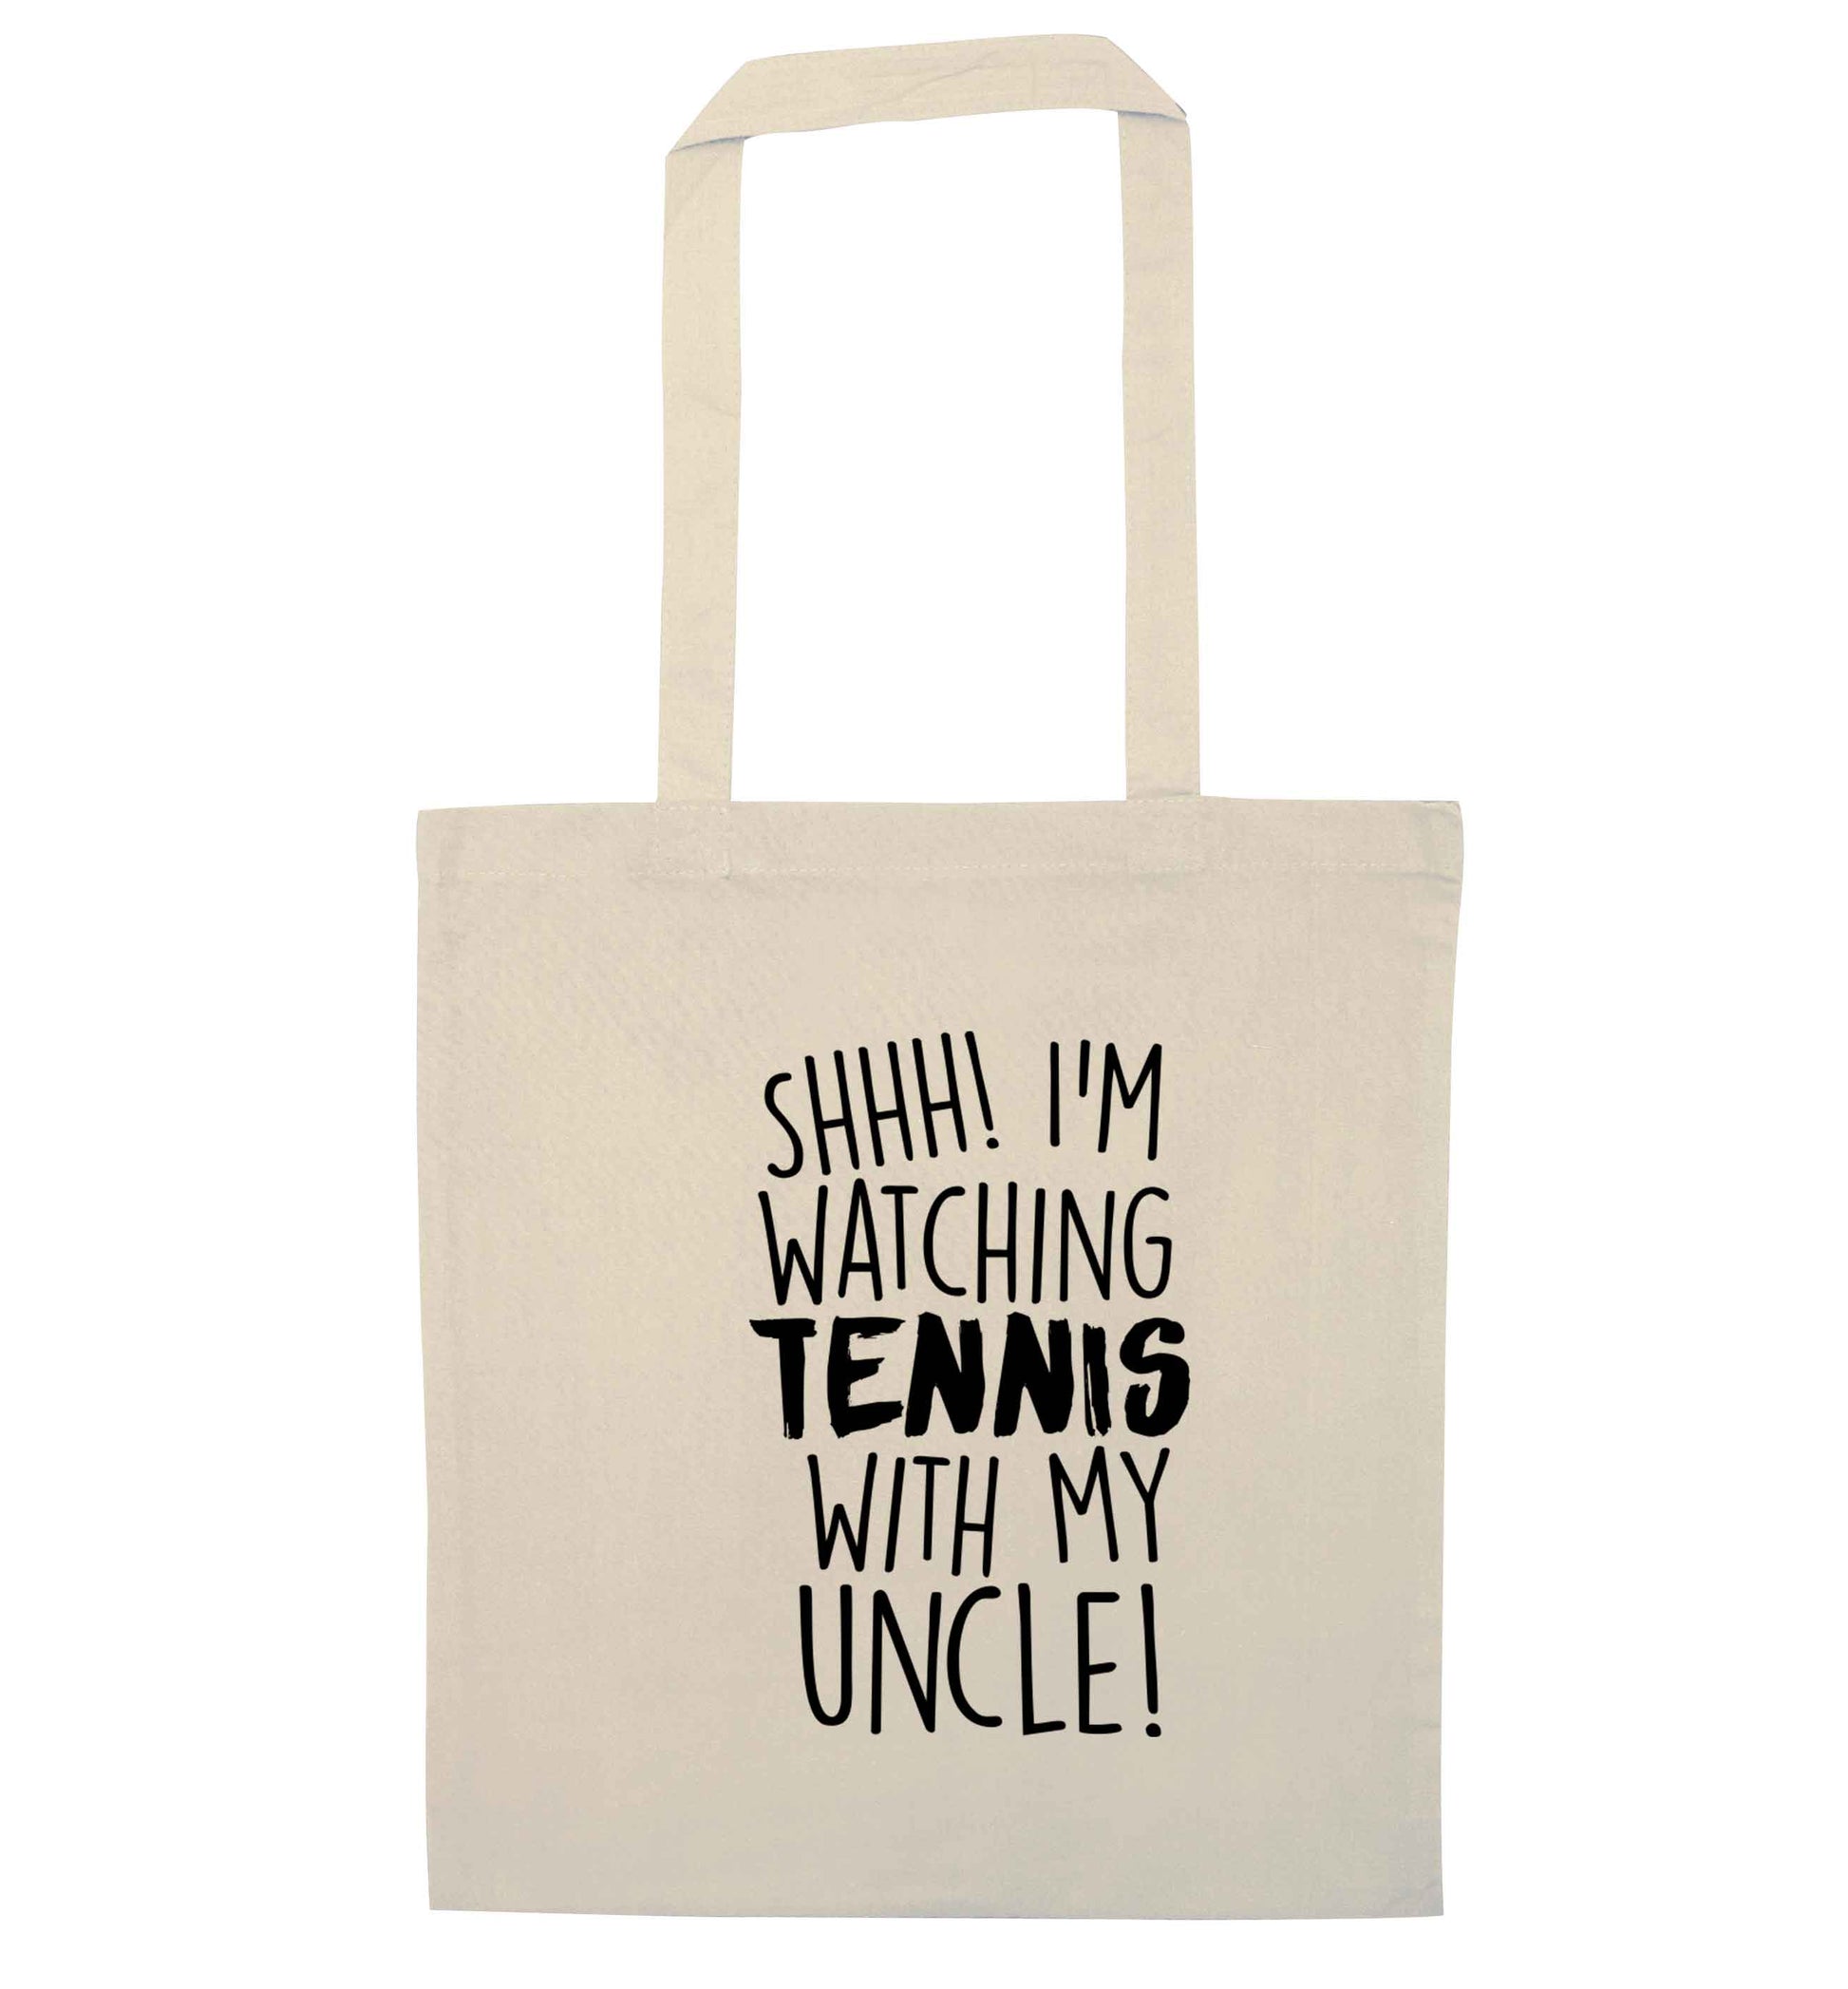 Shh! I'm watching tennis with my uncle! natural tote bag